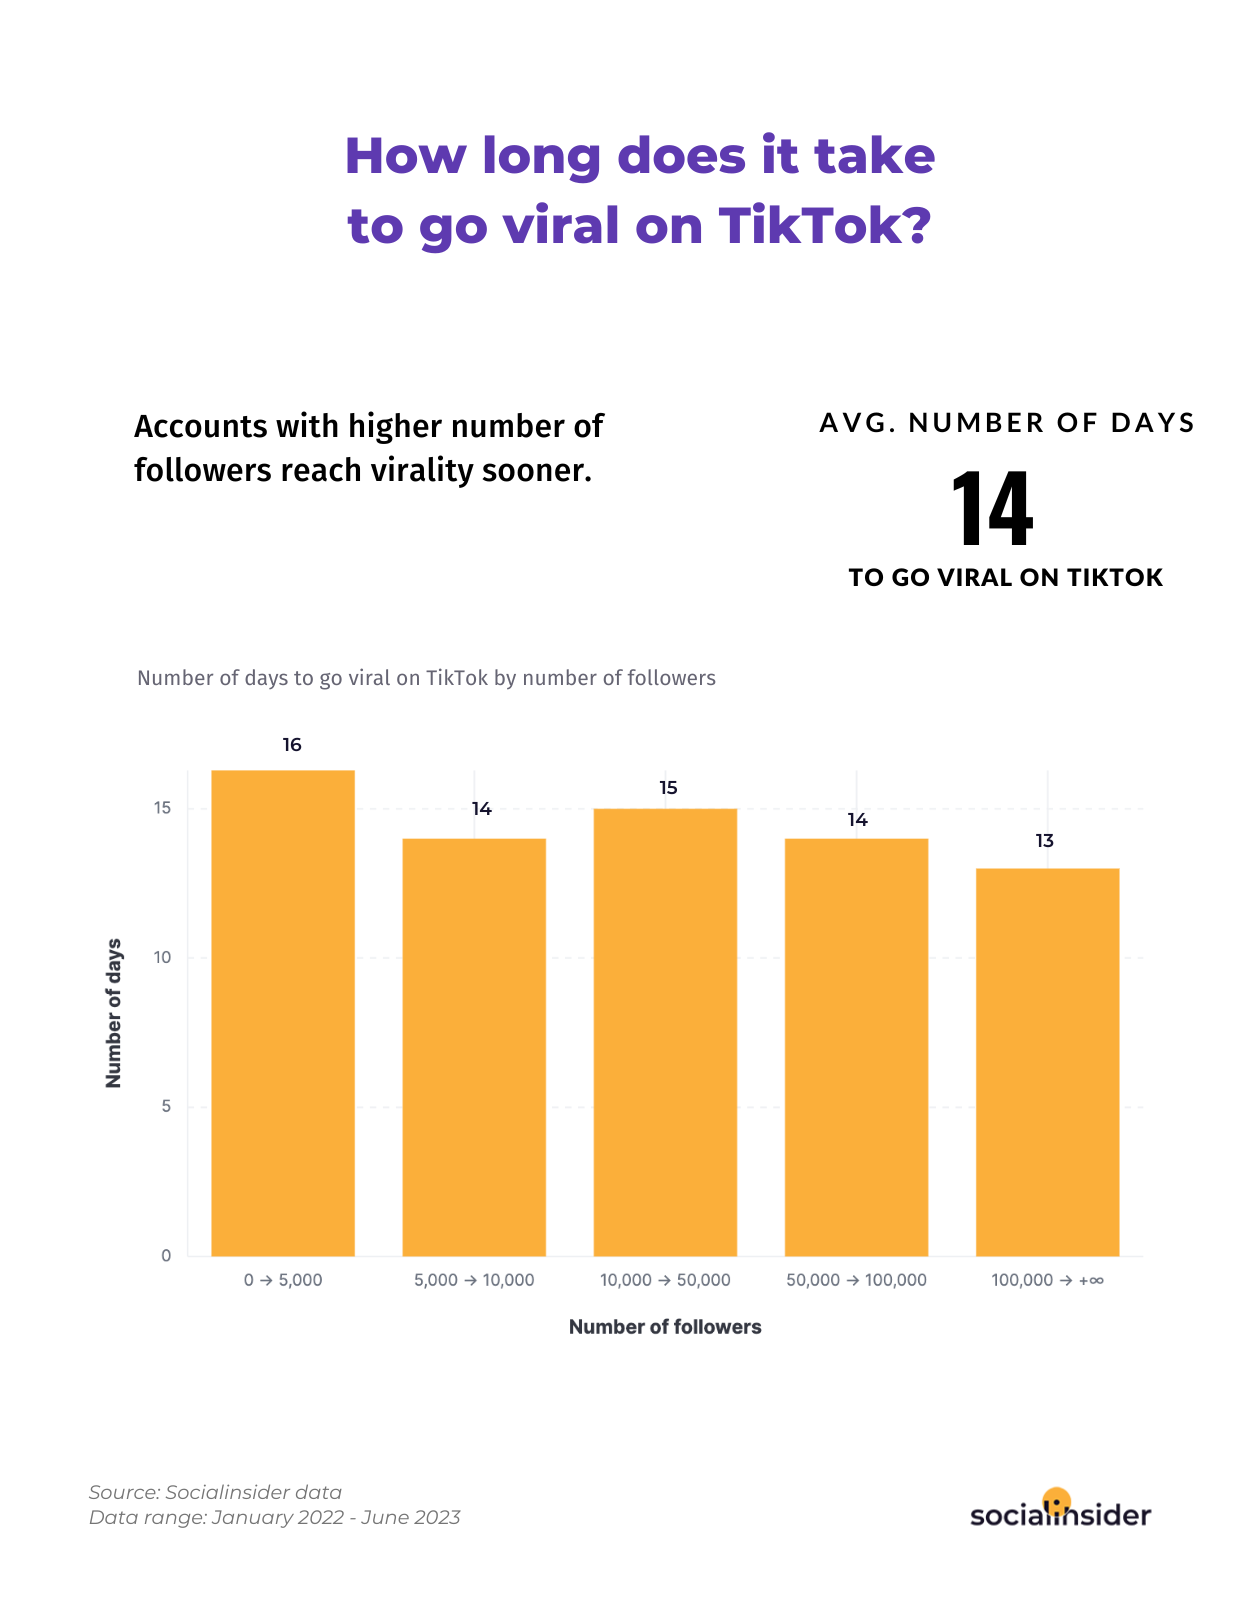 Here is a chart indicating how does an account's follower size impact virality speed on TikTok.